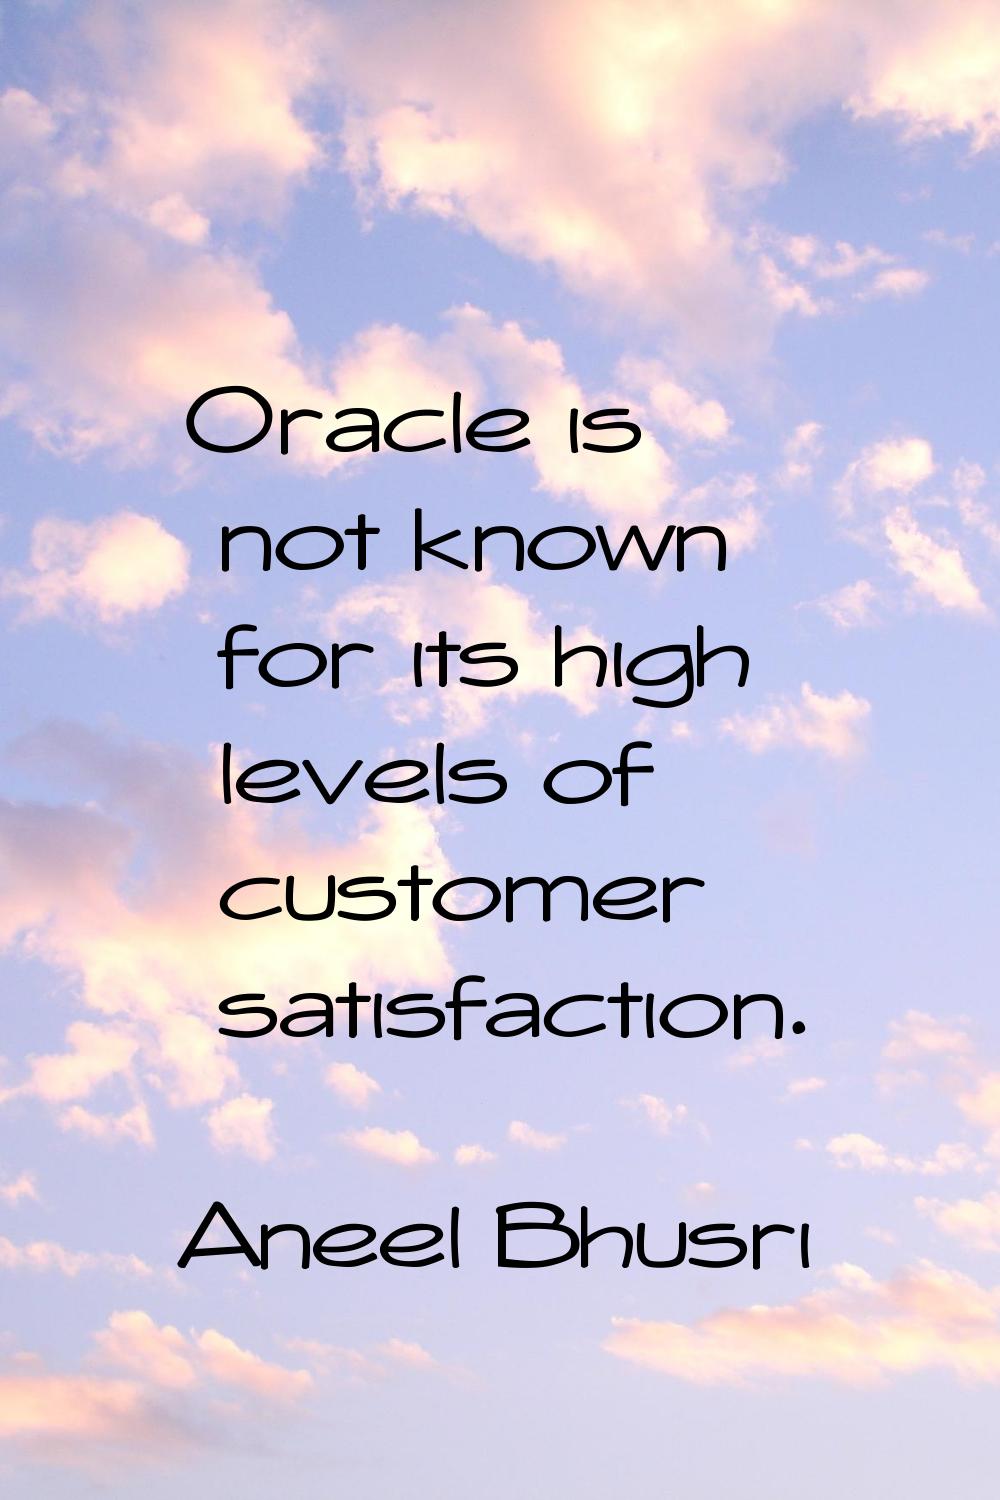 Oracle is not known for its high levels of customer satisfaction.